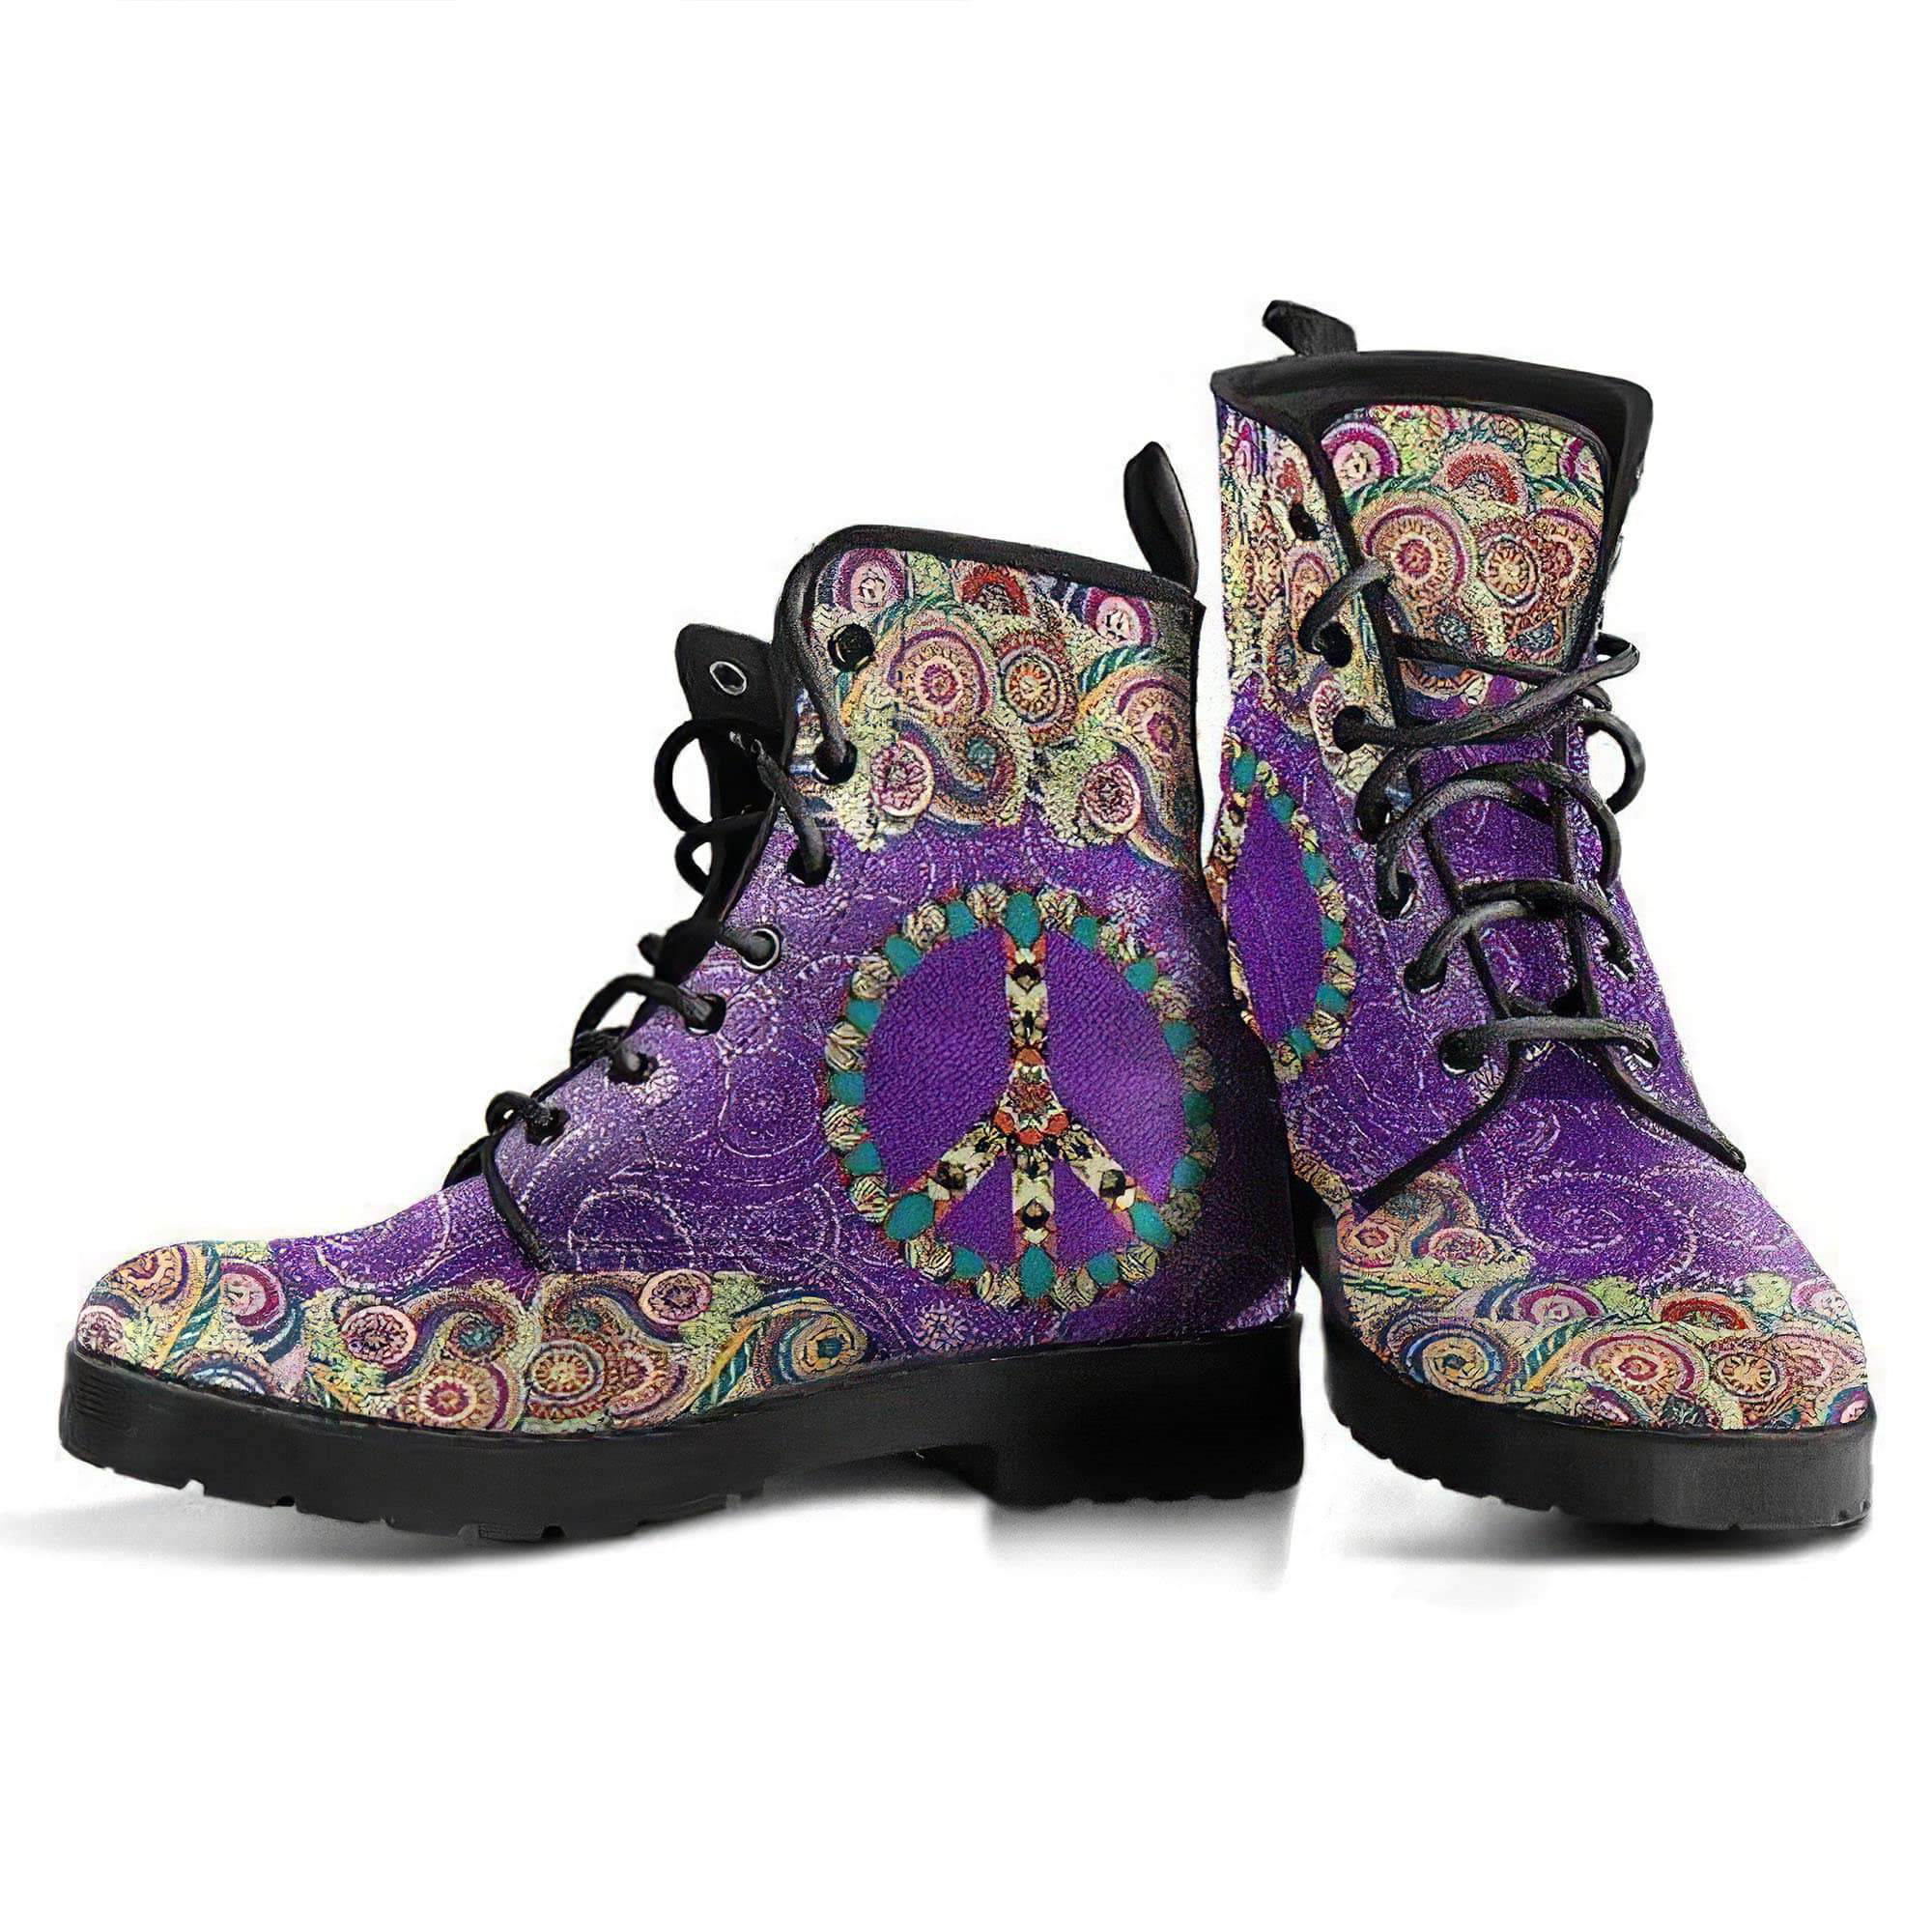 peace-mandala-purple-handcrafted-boots-women-s-leather-boots-12051928514621.jpg